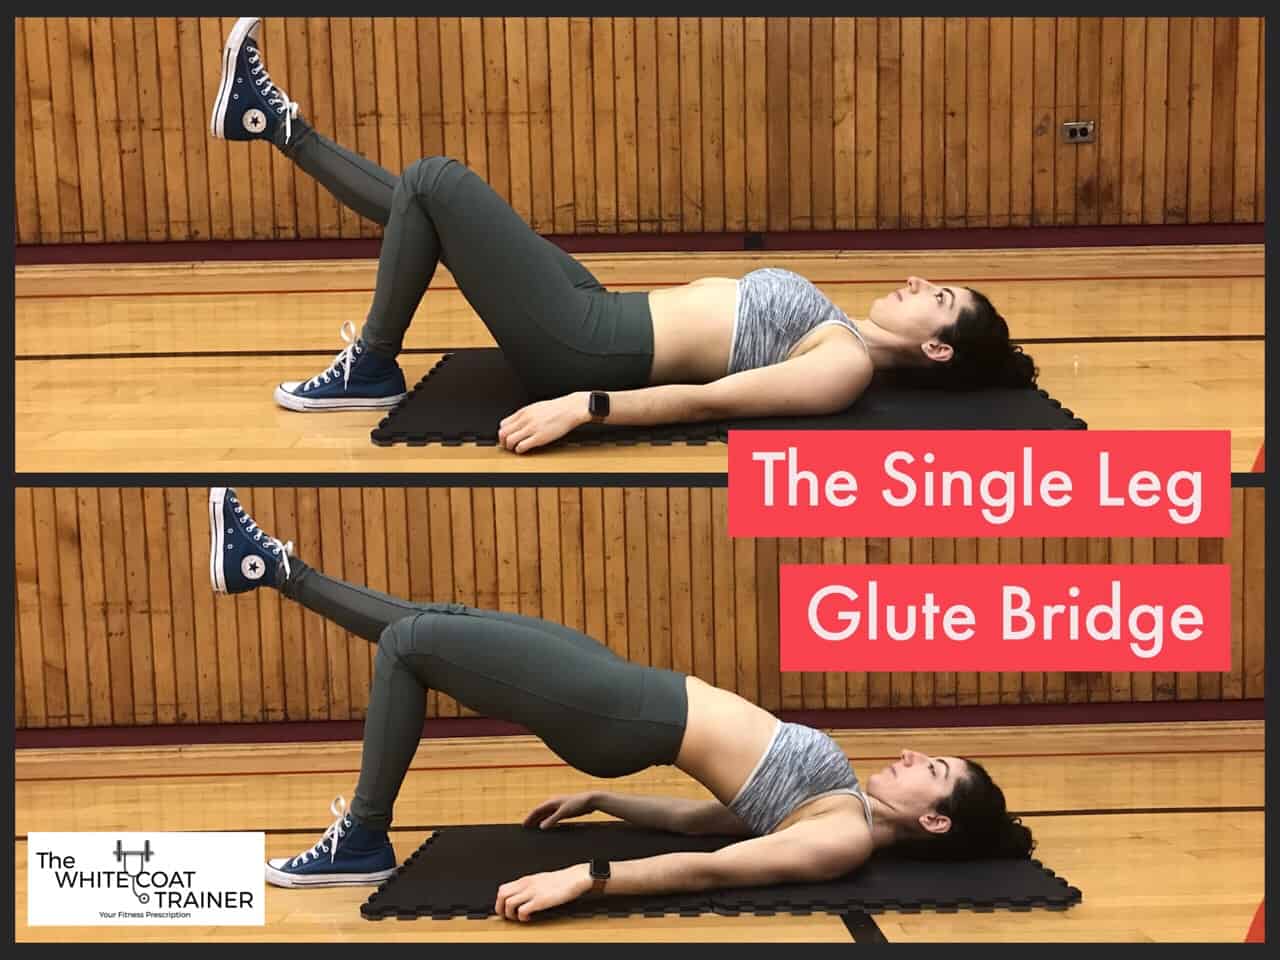 single-leg-glute-bridge: Brittany on her back with knees bent and feet flat on the floor Squeezing her butt muscles to extend at the hips on just one leg